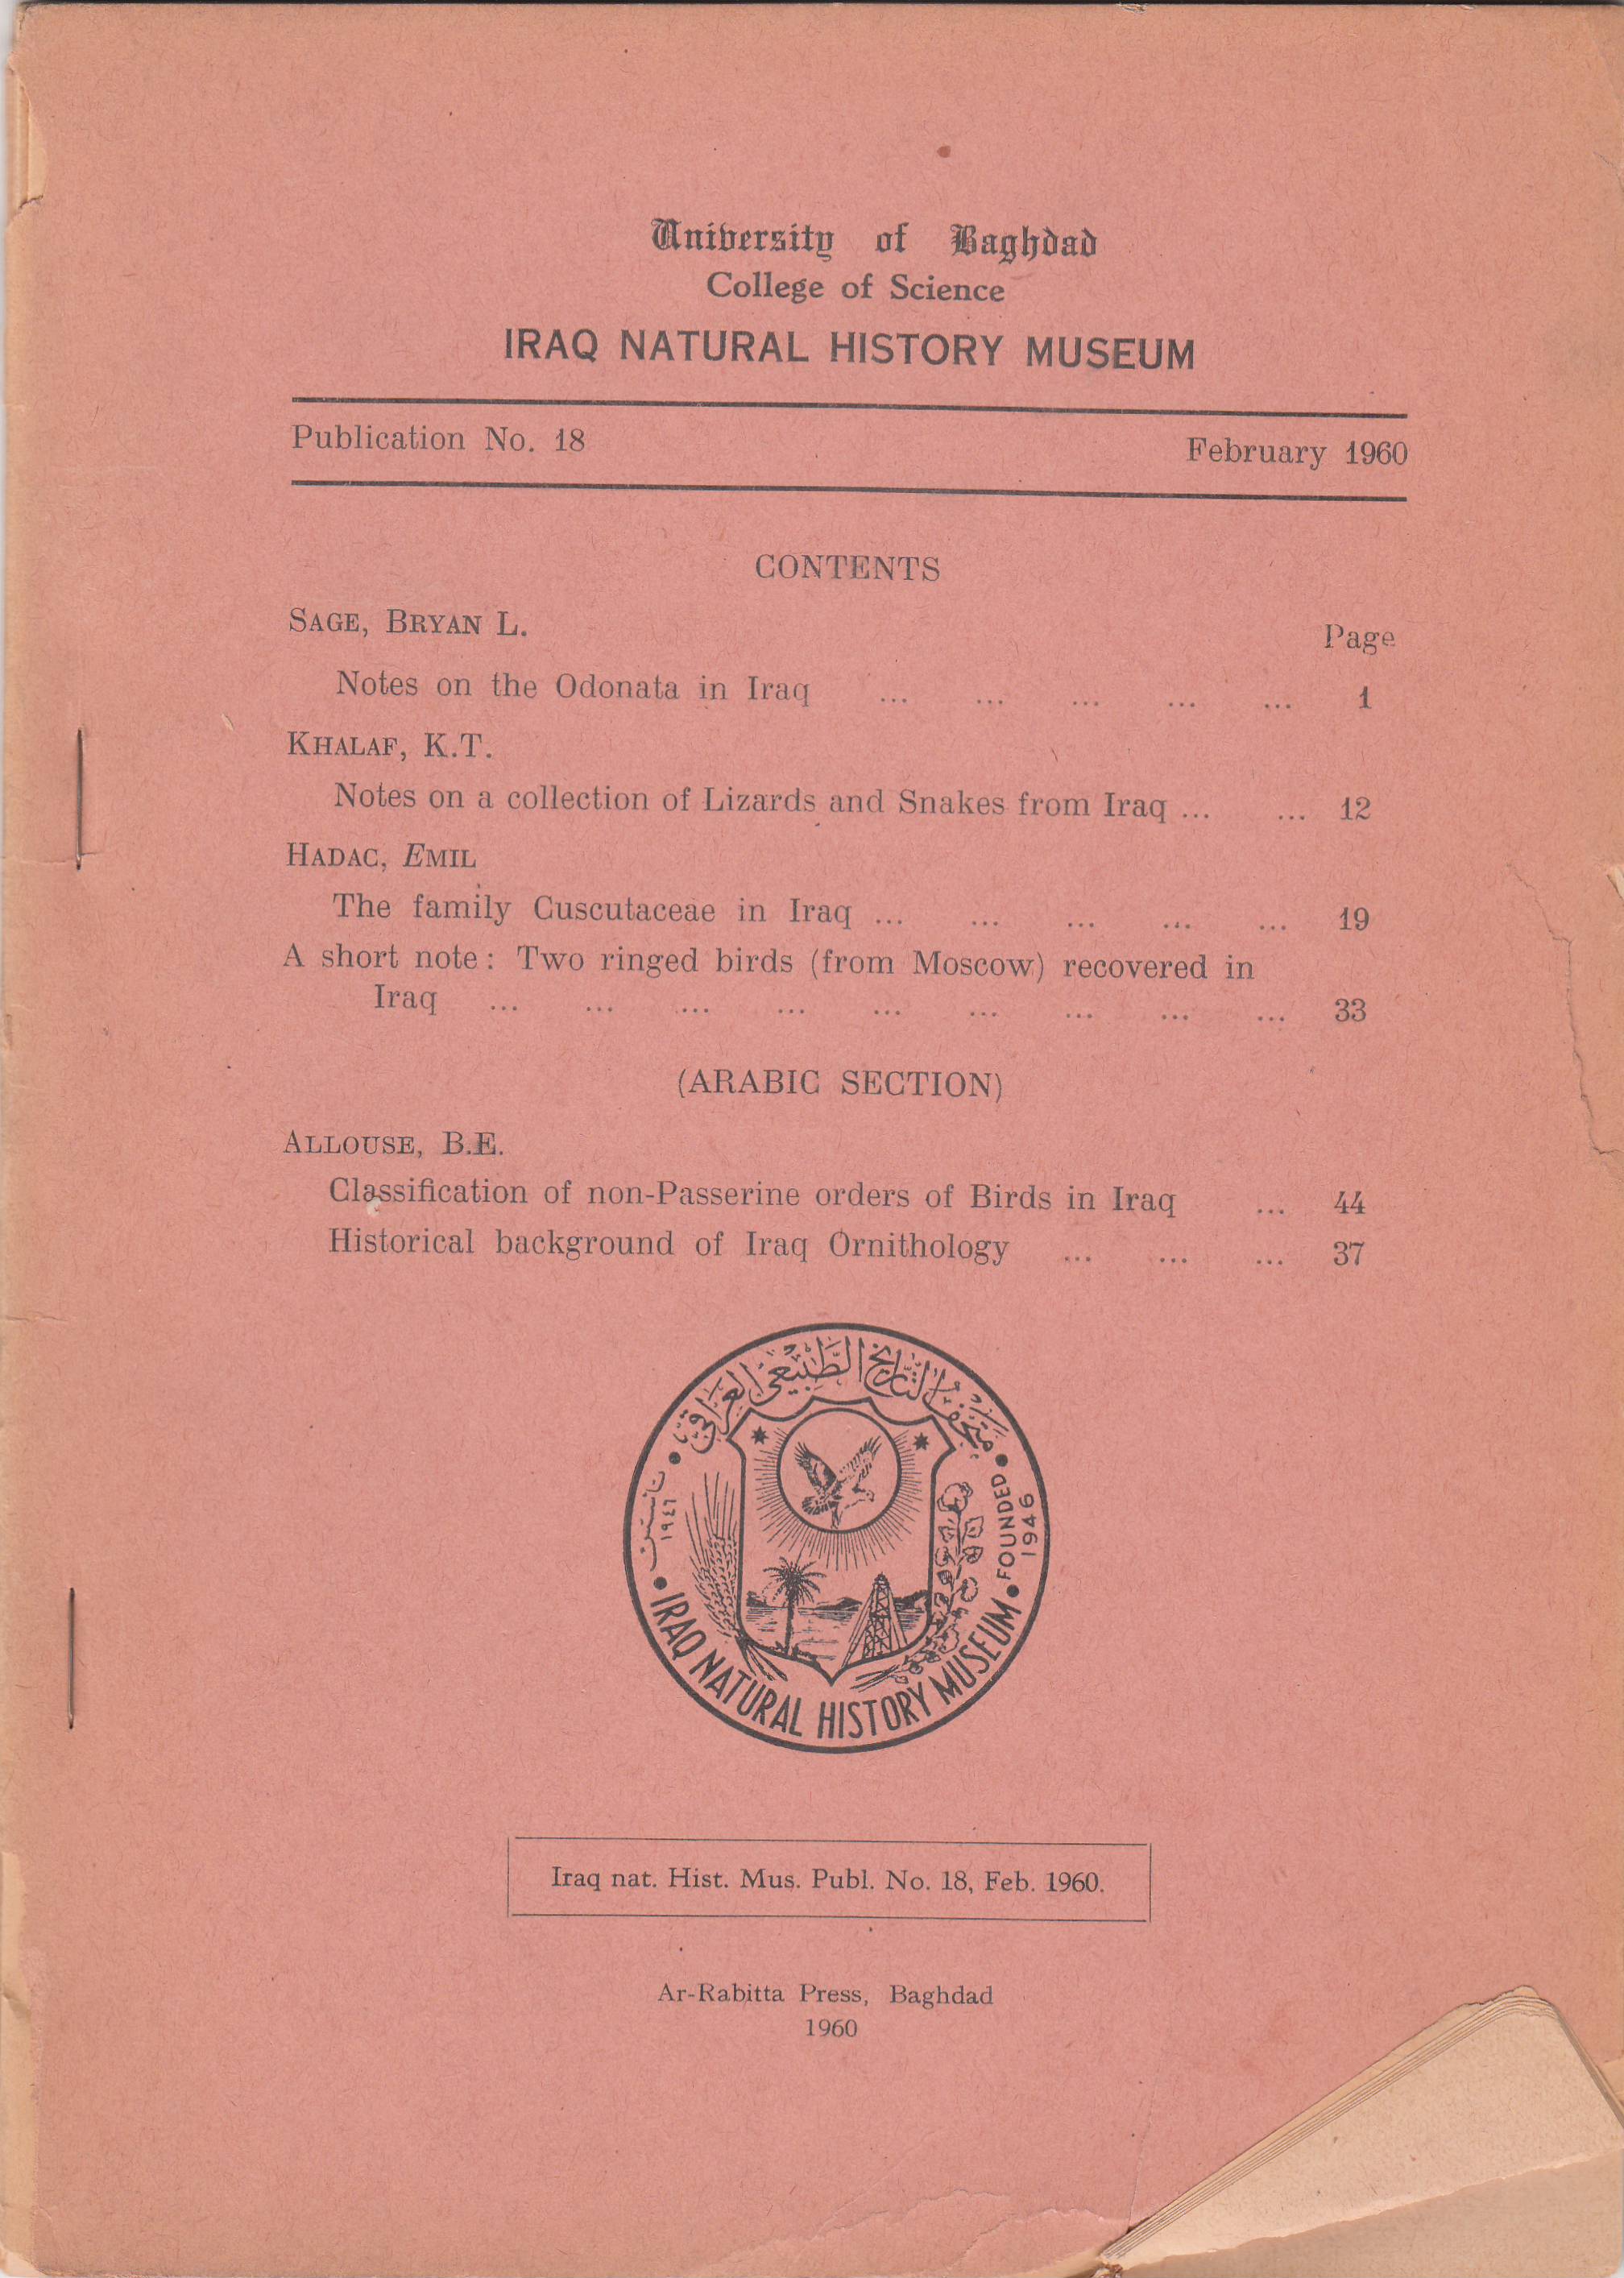 					View No. 18 (1960): A short note : Two ringed birds (from Moscow) recovered in Iraq  Iraq by HADAC, EMIL p; 33
				